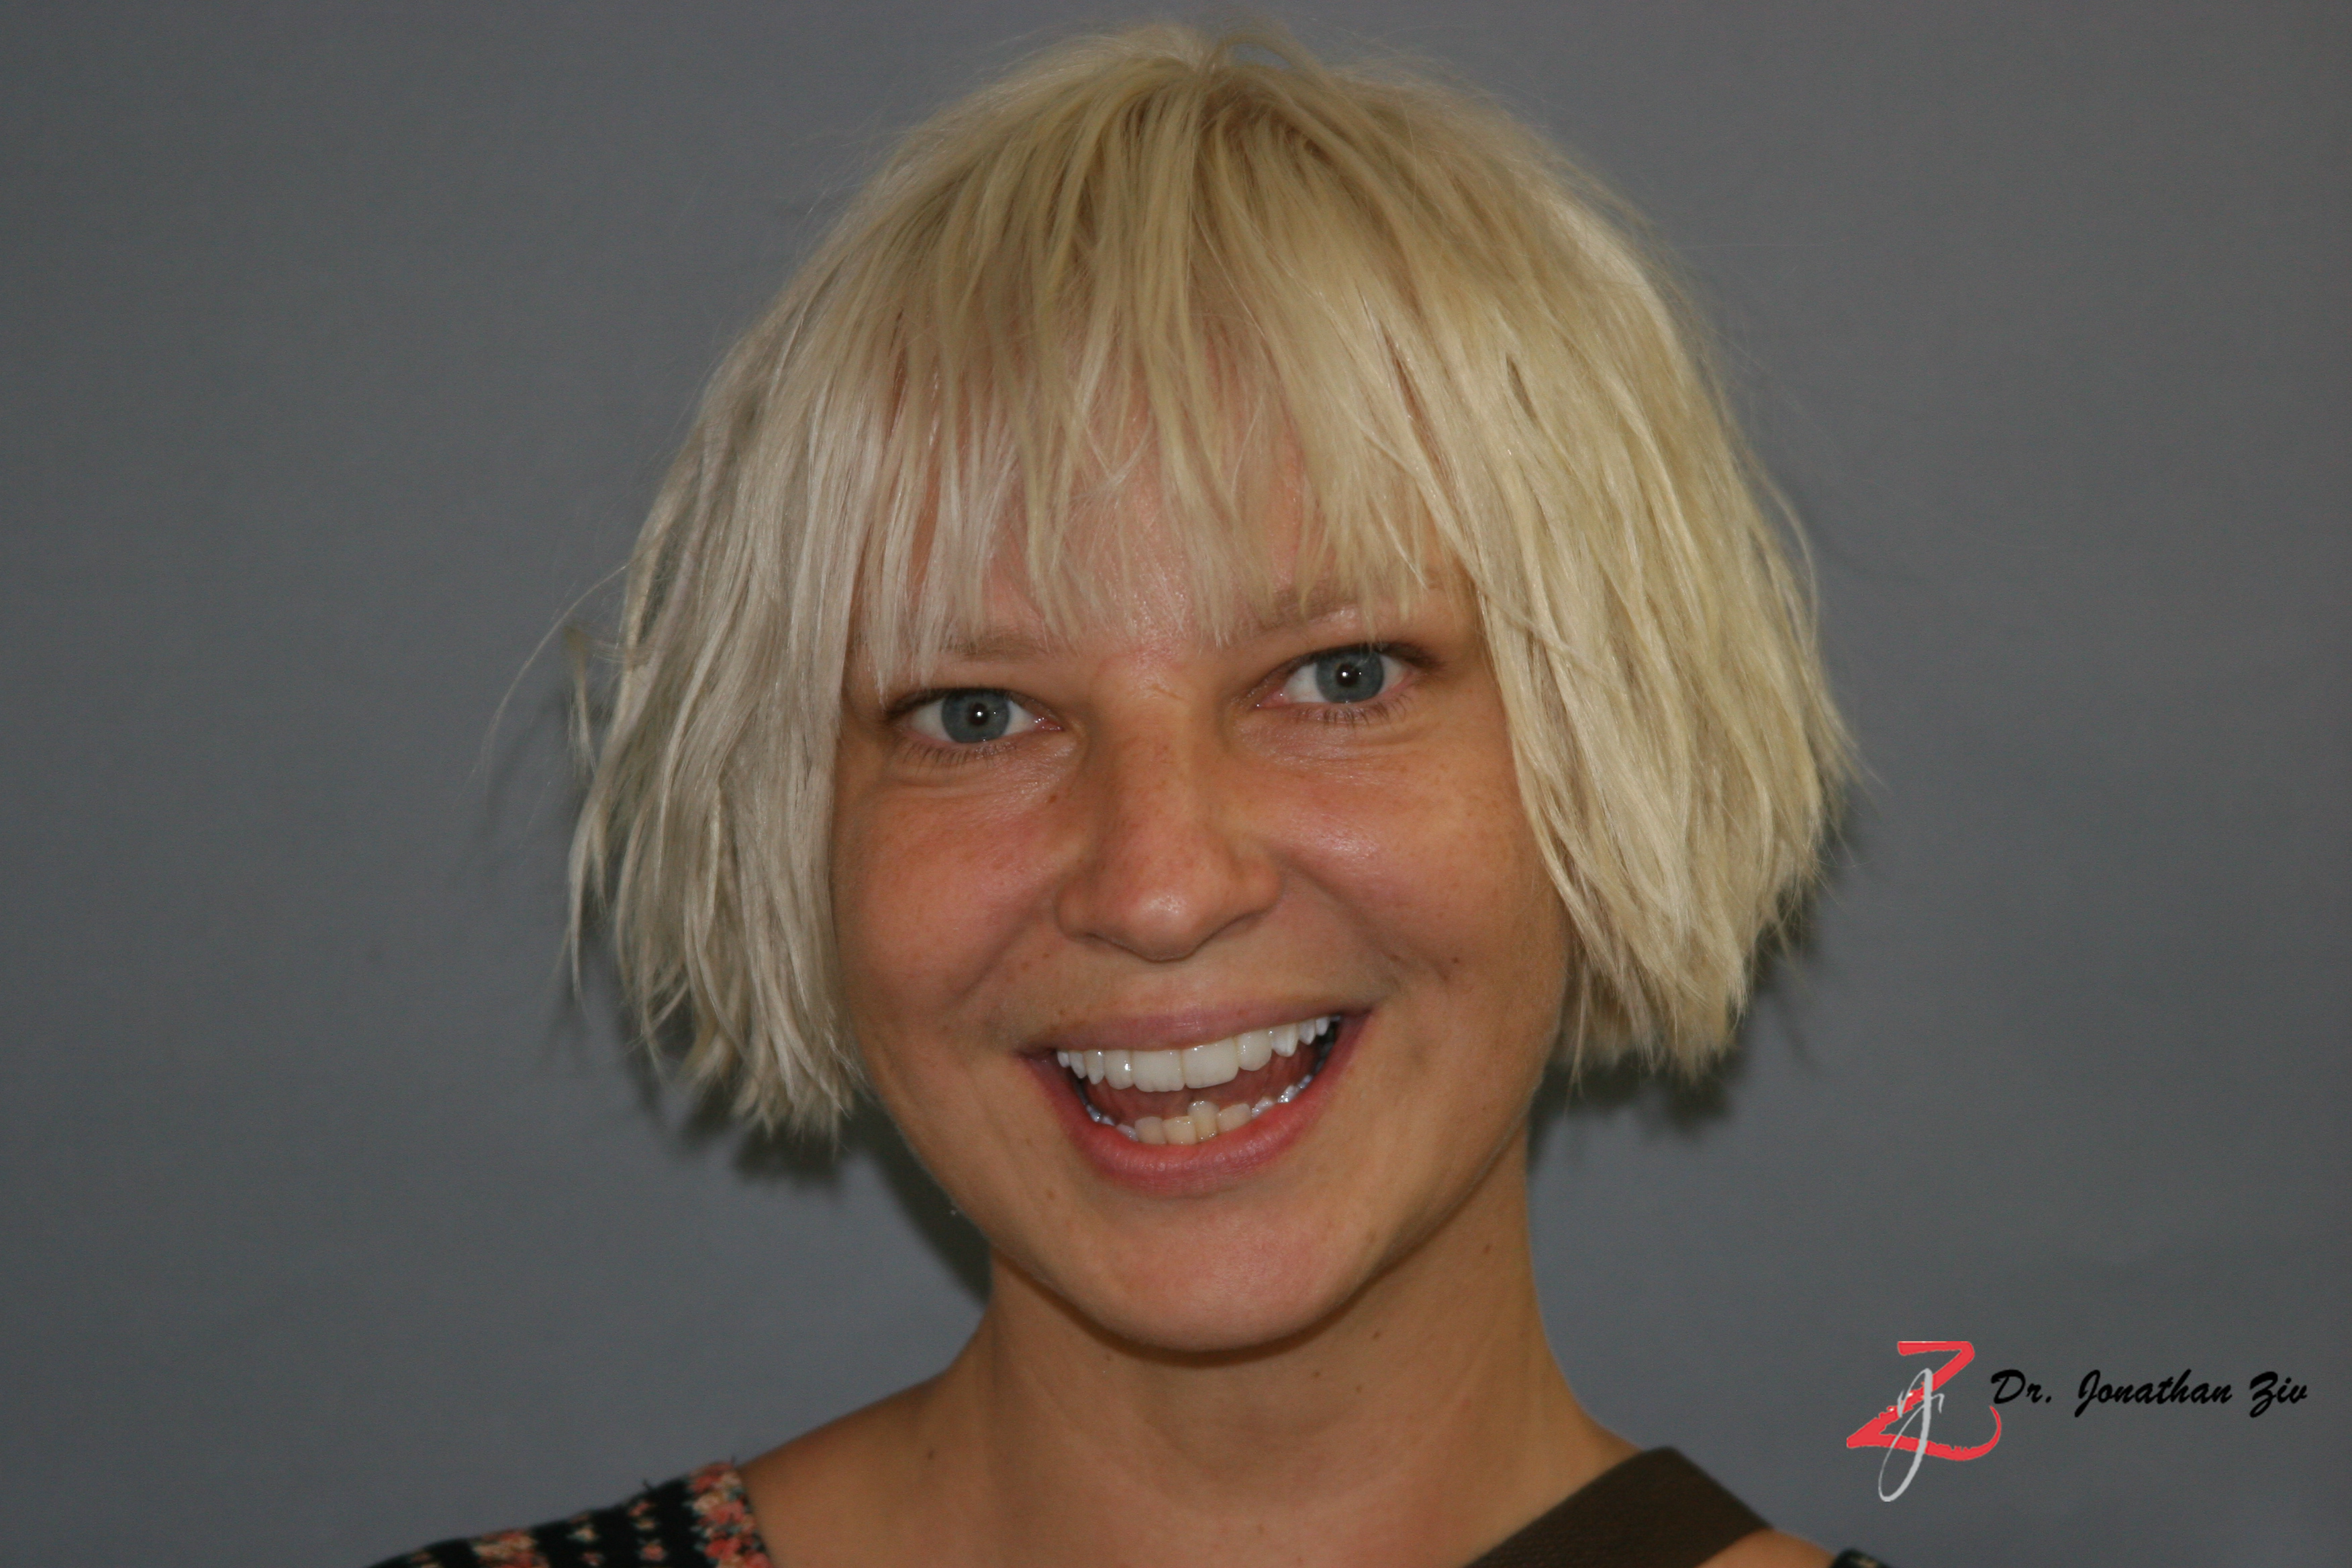 Download this Sia Furler picture